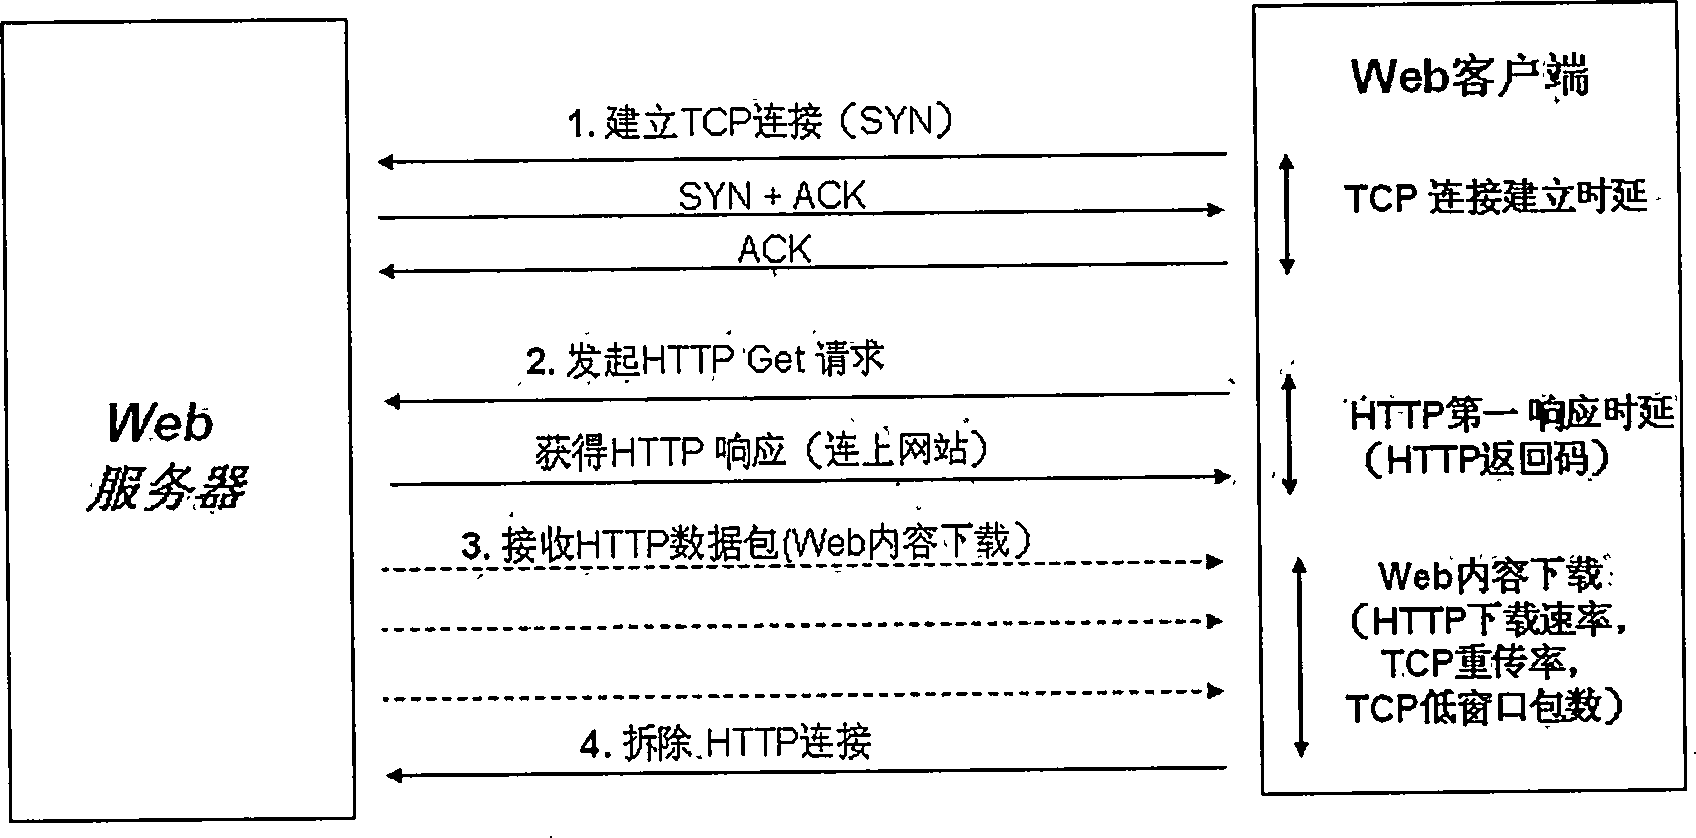 Method and system for diagnosing Web application performance problem